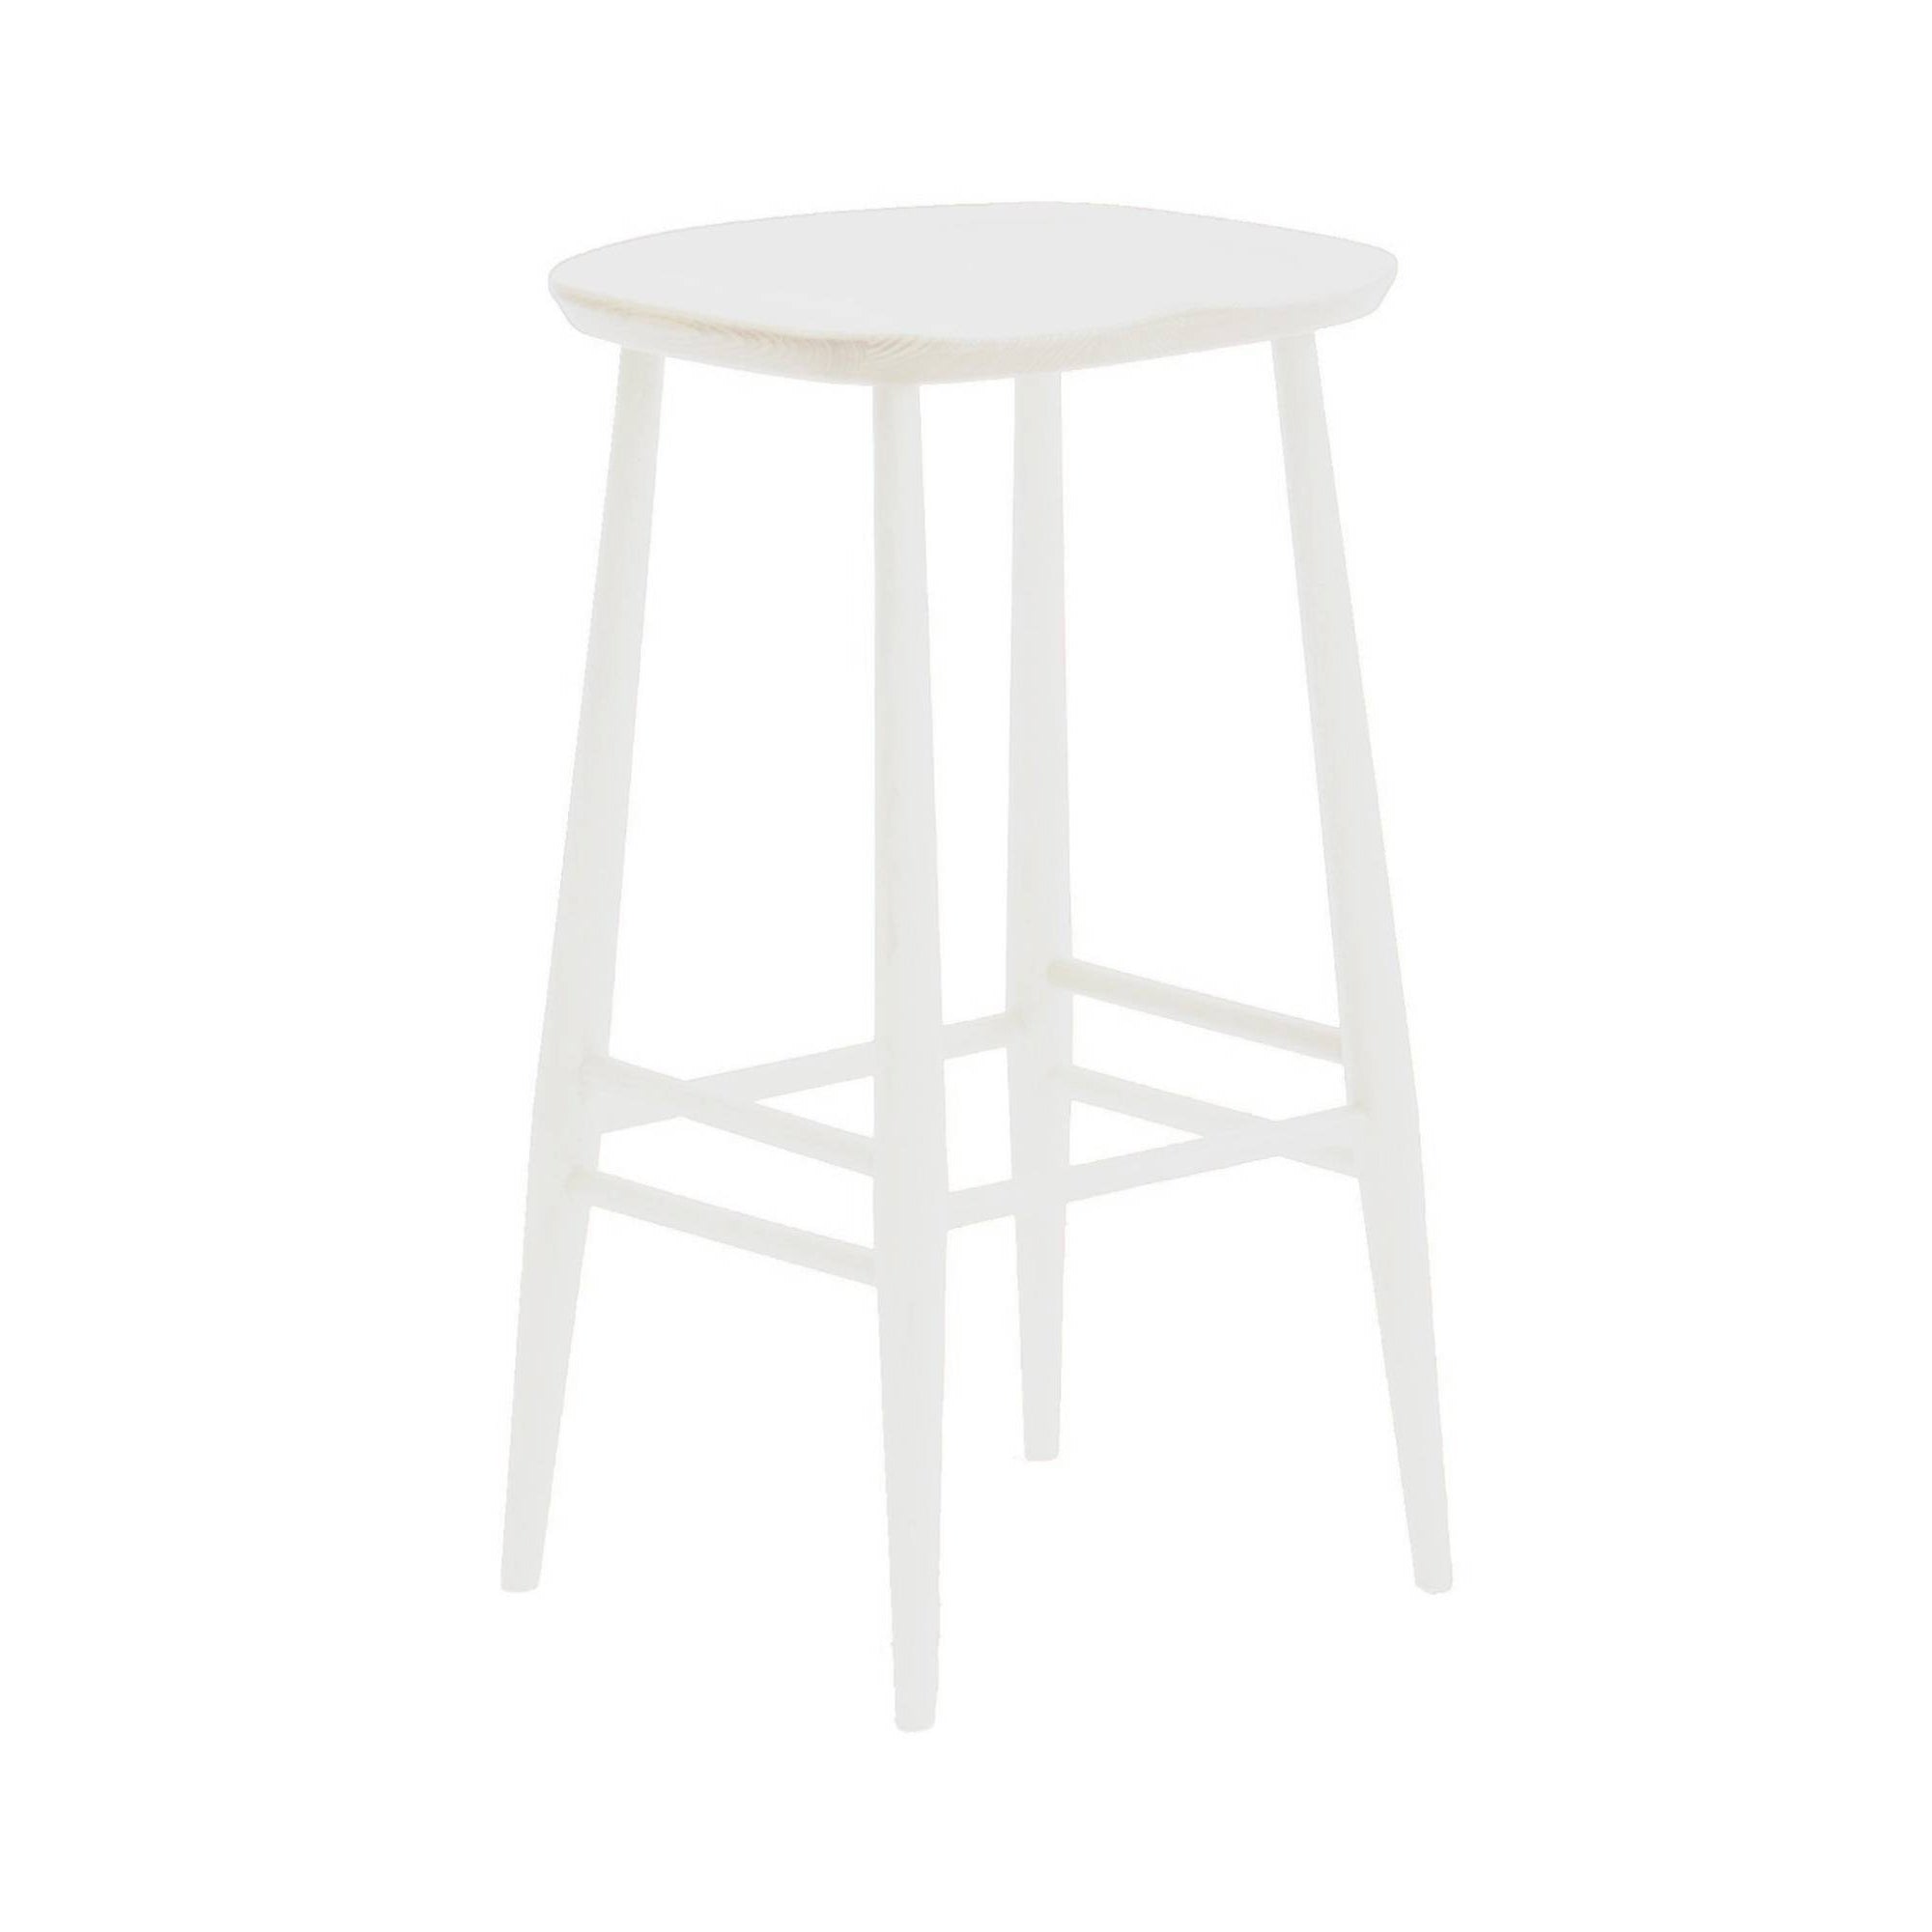 Originals Utility Bar + Counter Stool: Bar + Stained Off White